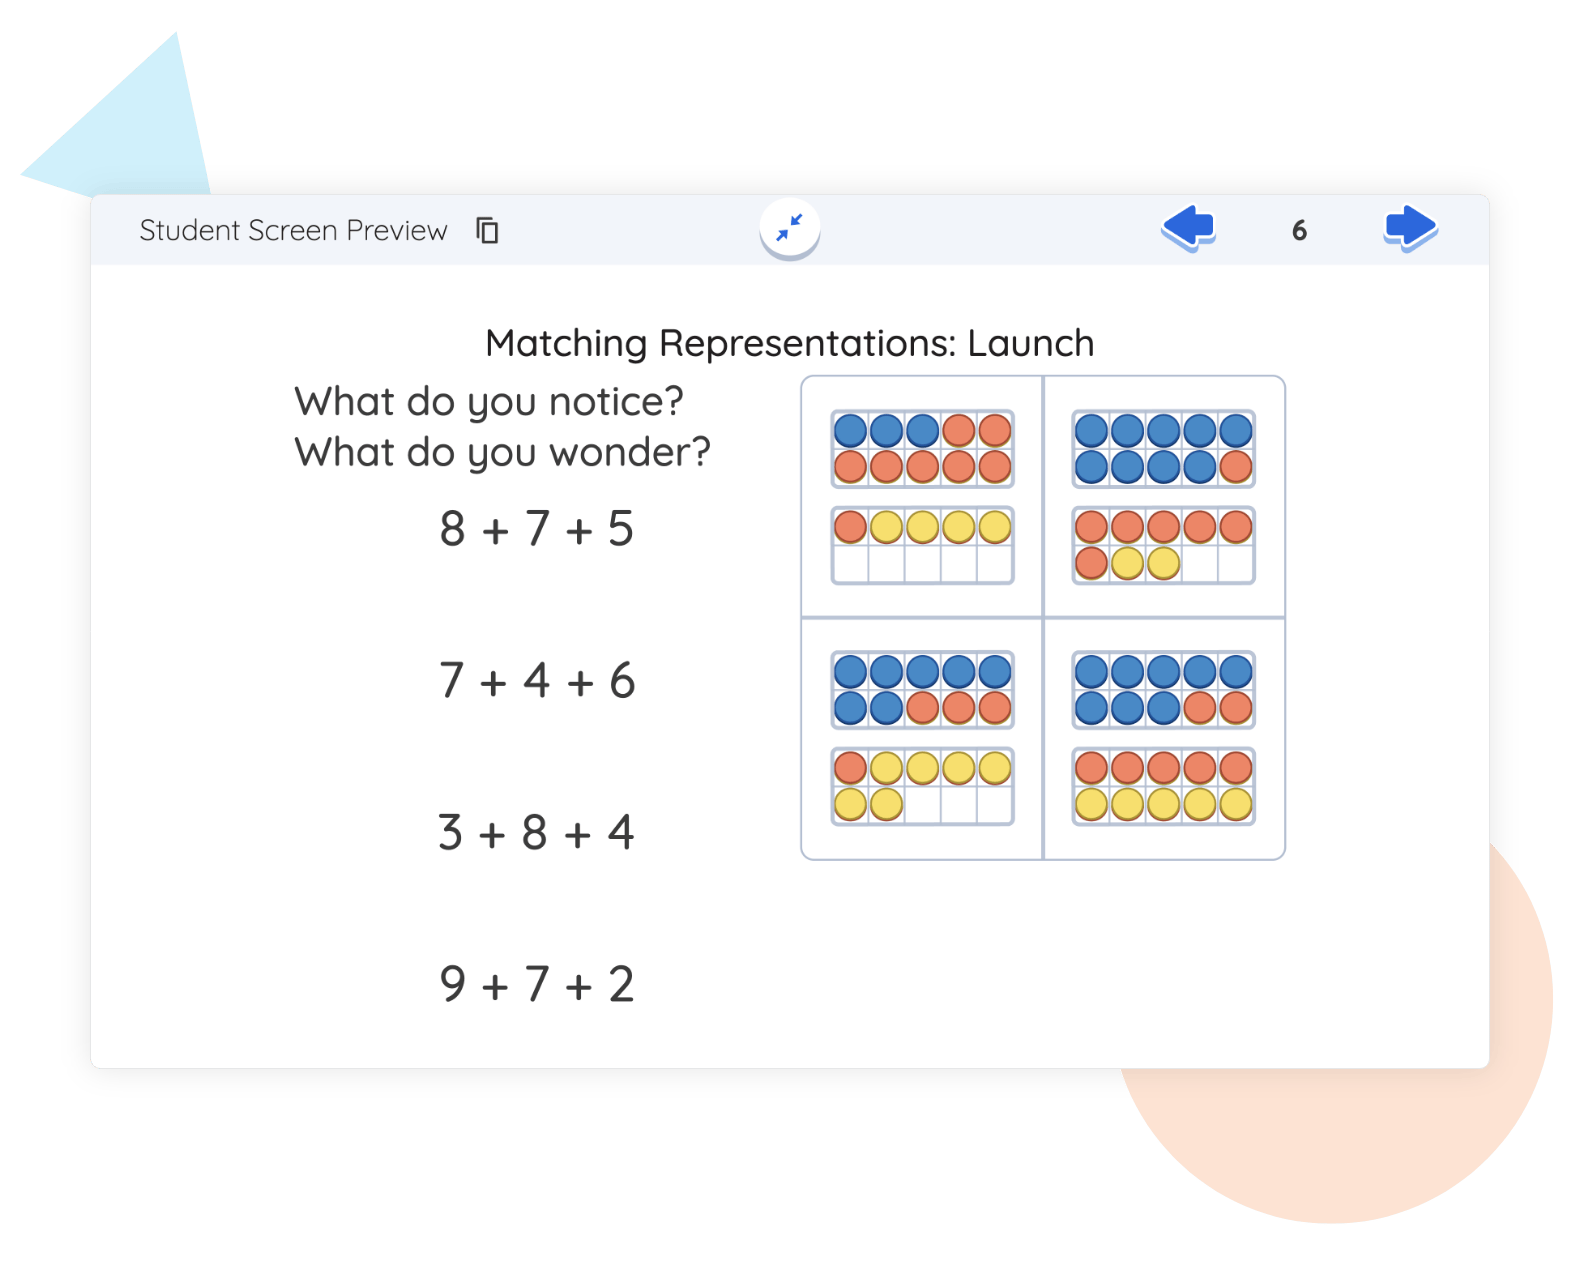 Illustration of an Amplify Desmos math learning tool on a student screen showing abacus representations for the sums 8+7, 7+4+5, 3+8+4